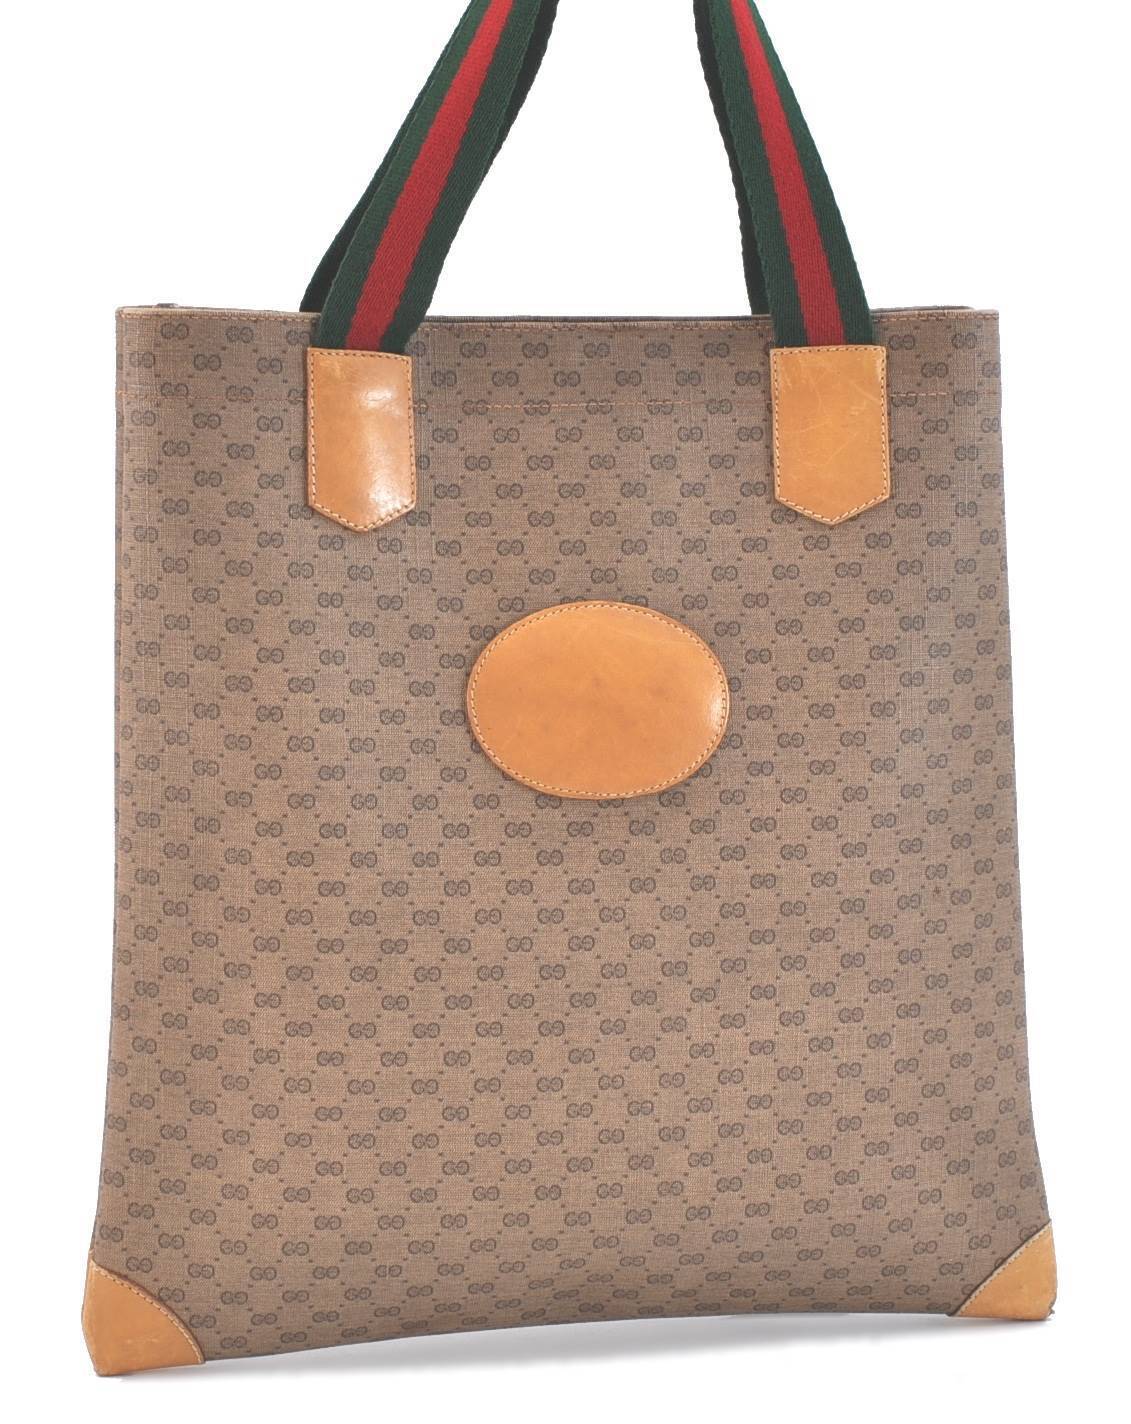 Auth GUCCI Micro GG Web Sherry Line Hand Tote Bag GG PVC Leather Brown G6469